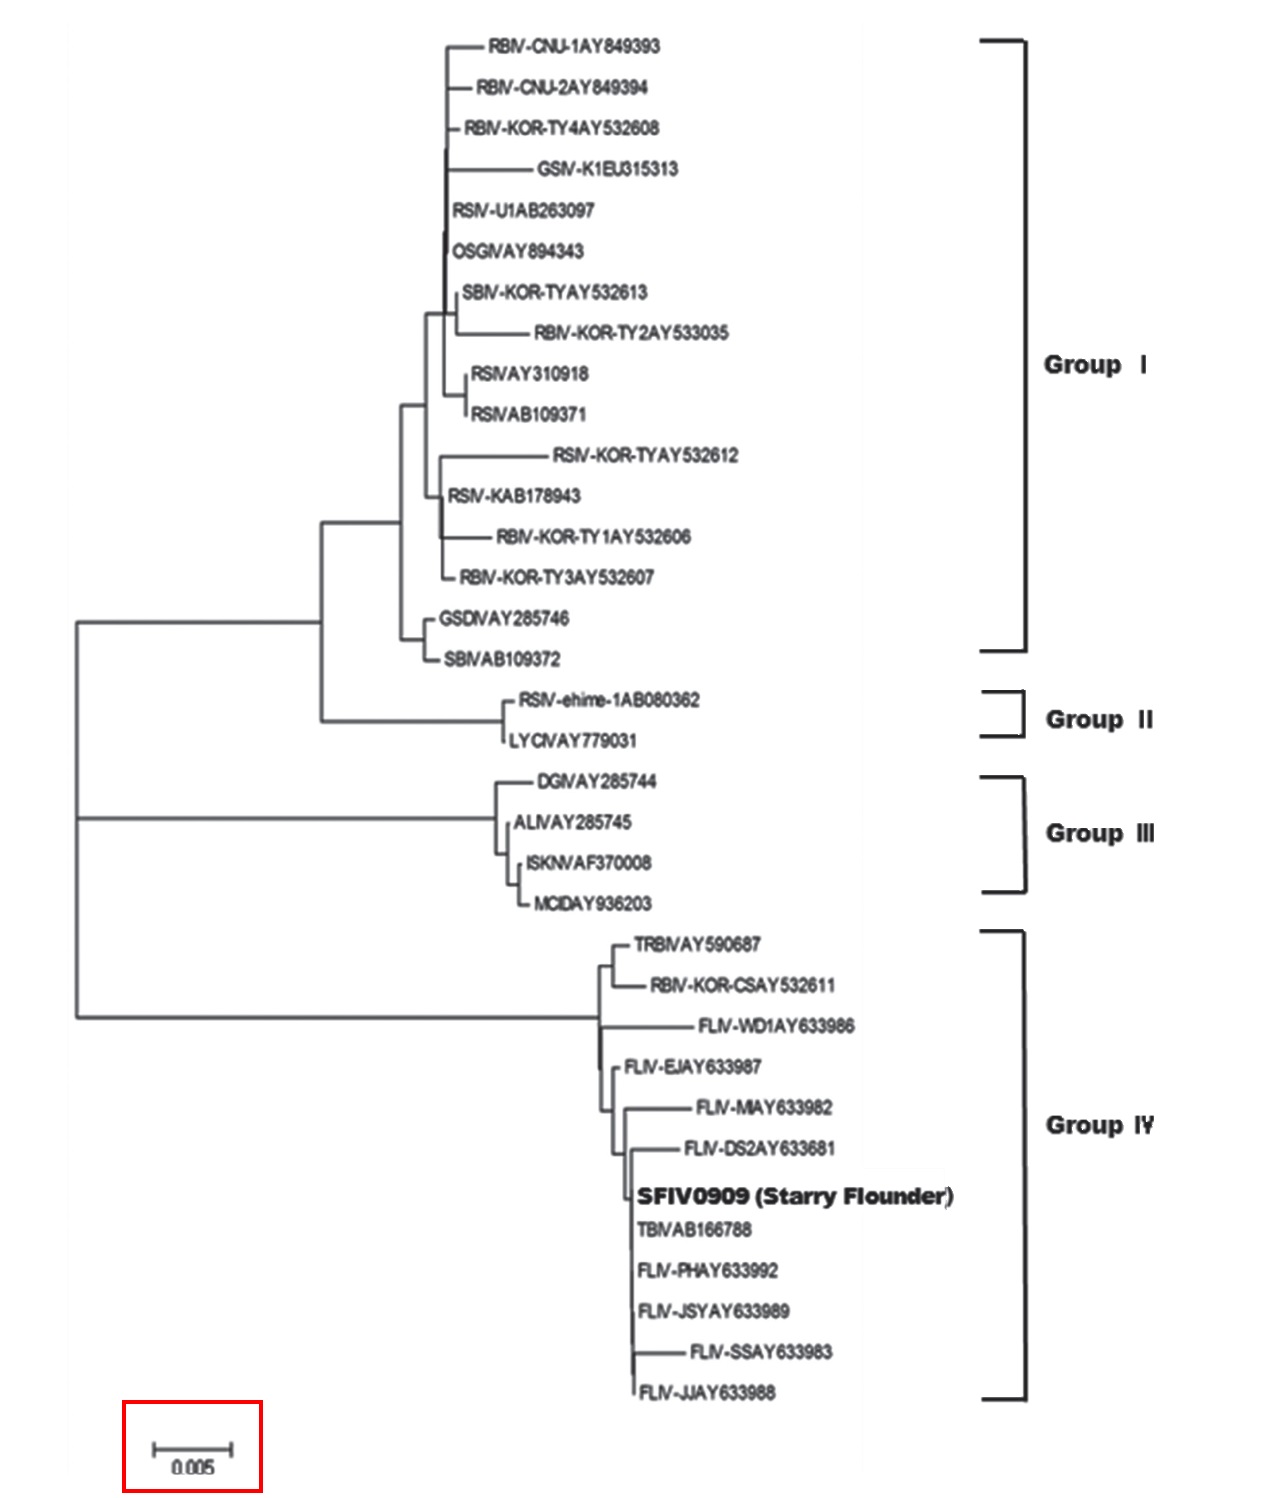 Phylogenetic tree based on neighbor-joining analyses of the major capsid protein gene sequences of megalocytiviruses. Numbers at nodes indicate bootstrap confidence values (1,000 replications). GenBank accession numbers are given in parentheses. The detected starry flounder iridovirus is indicated in bold.